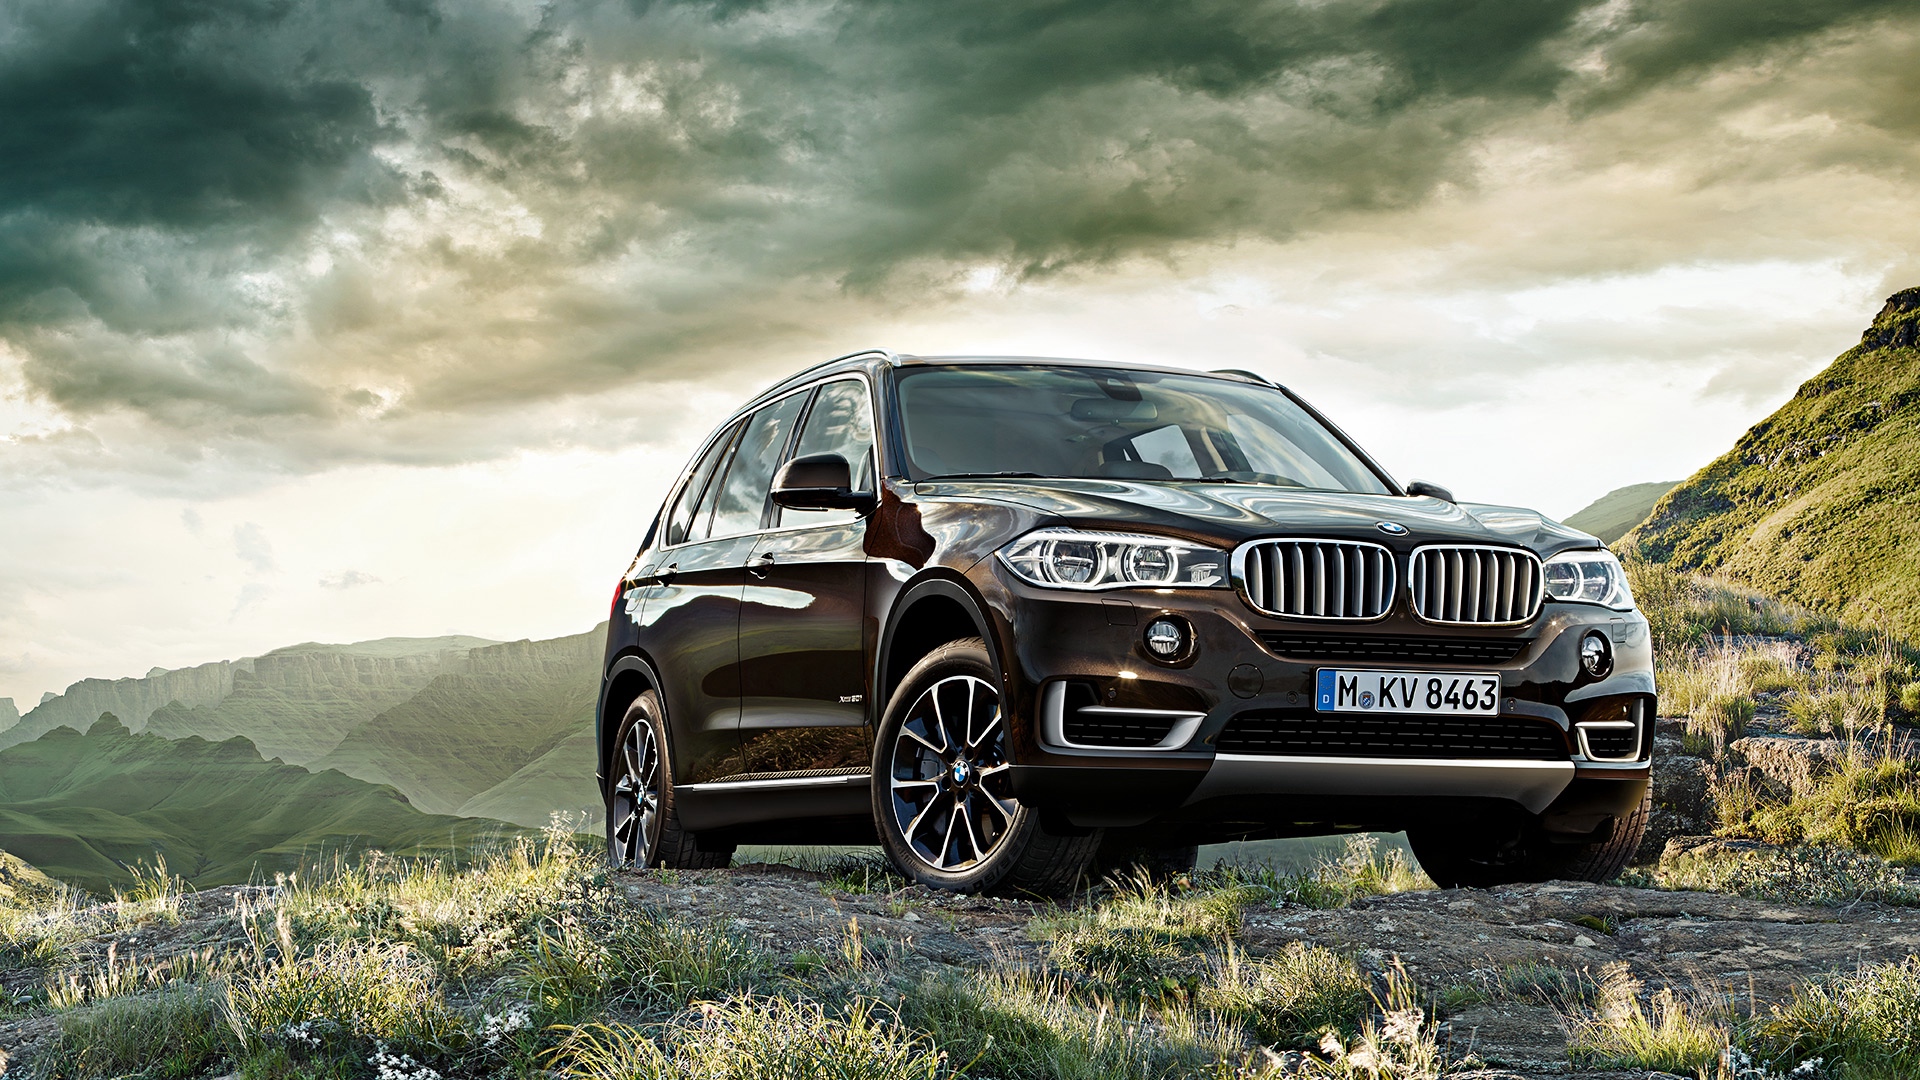 Wallpaper Bmw X5, Bmw, Style, Cars, New - New Style Background Hd - HD Wallpaper 